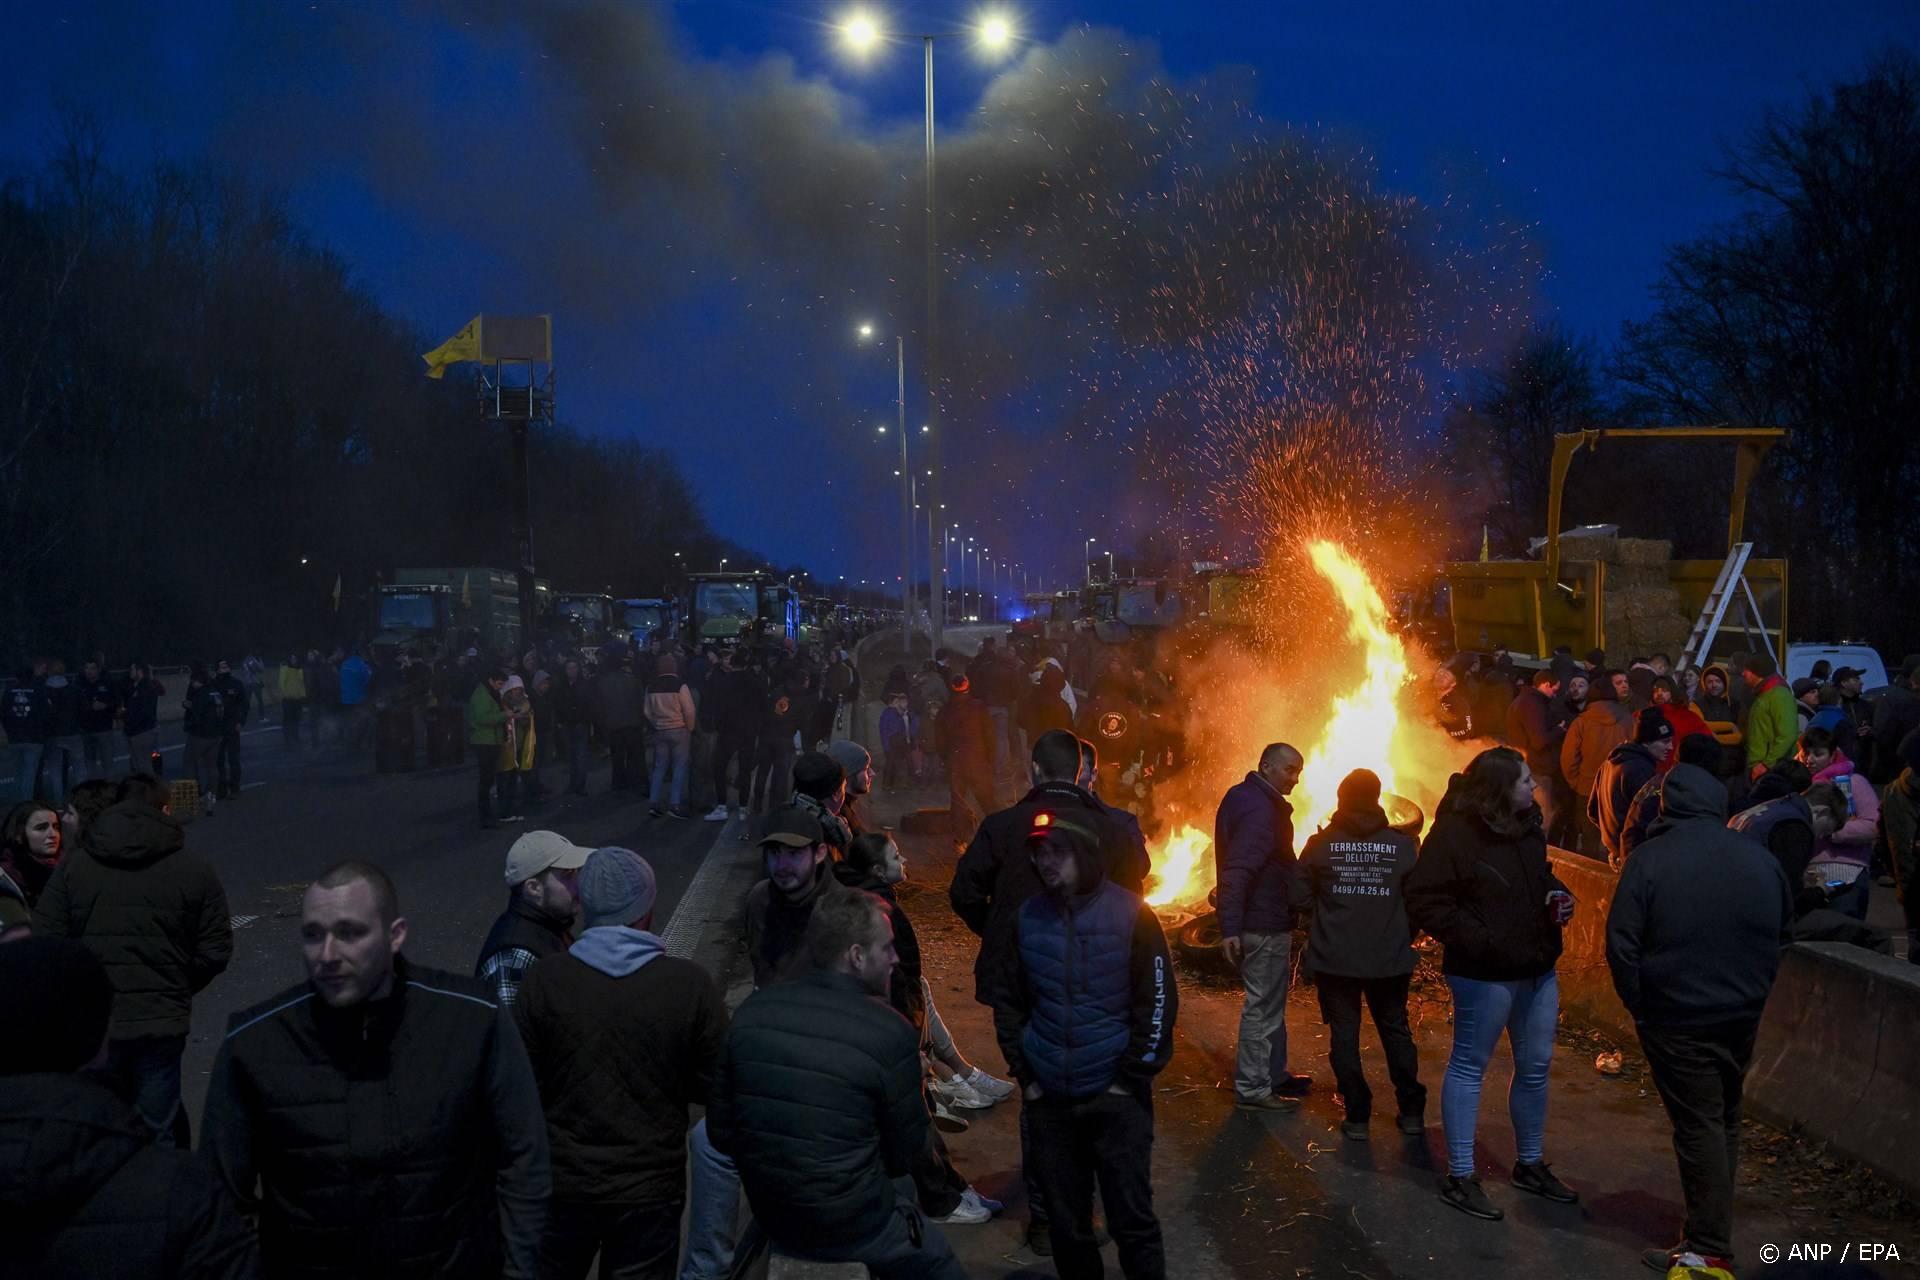 epa11111333 Farmers burn tires as they block the highway near Daussoulx, Belgium, 28 January 2024. The agricultural sector aims to highlight through these actions declining incomes, overly complex legislation, and administrative overload. The discontent among farmers, initially sparked in France, has spilled over into several European countries, including Belgium, particularly in the Walloon region.  EPA/FREDERIC SIERAKOWSKI